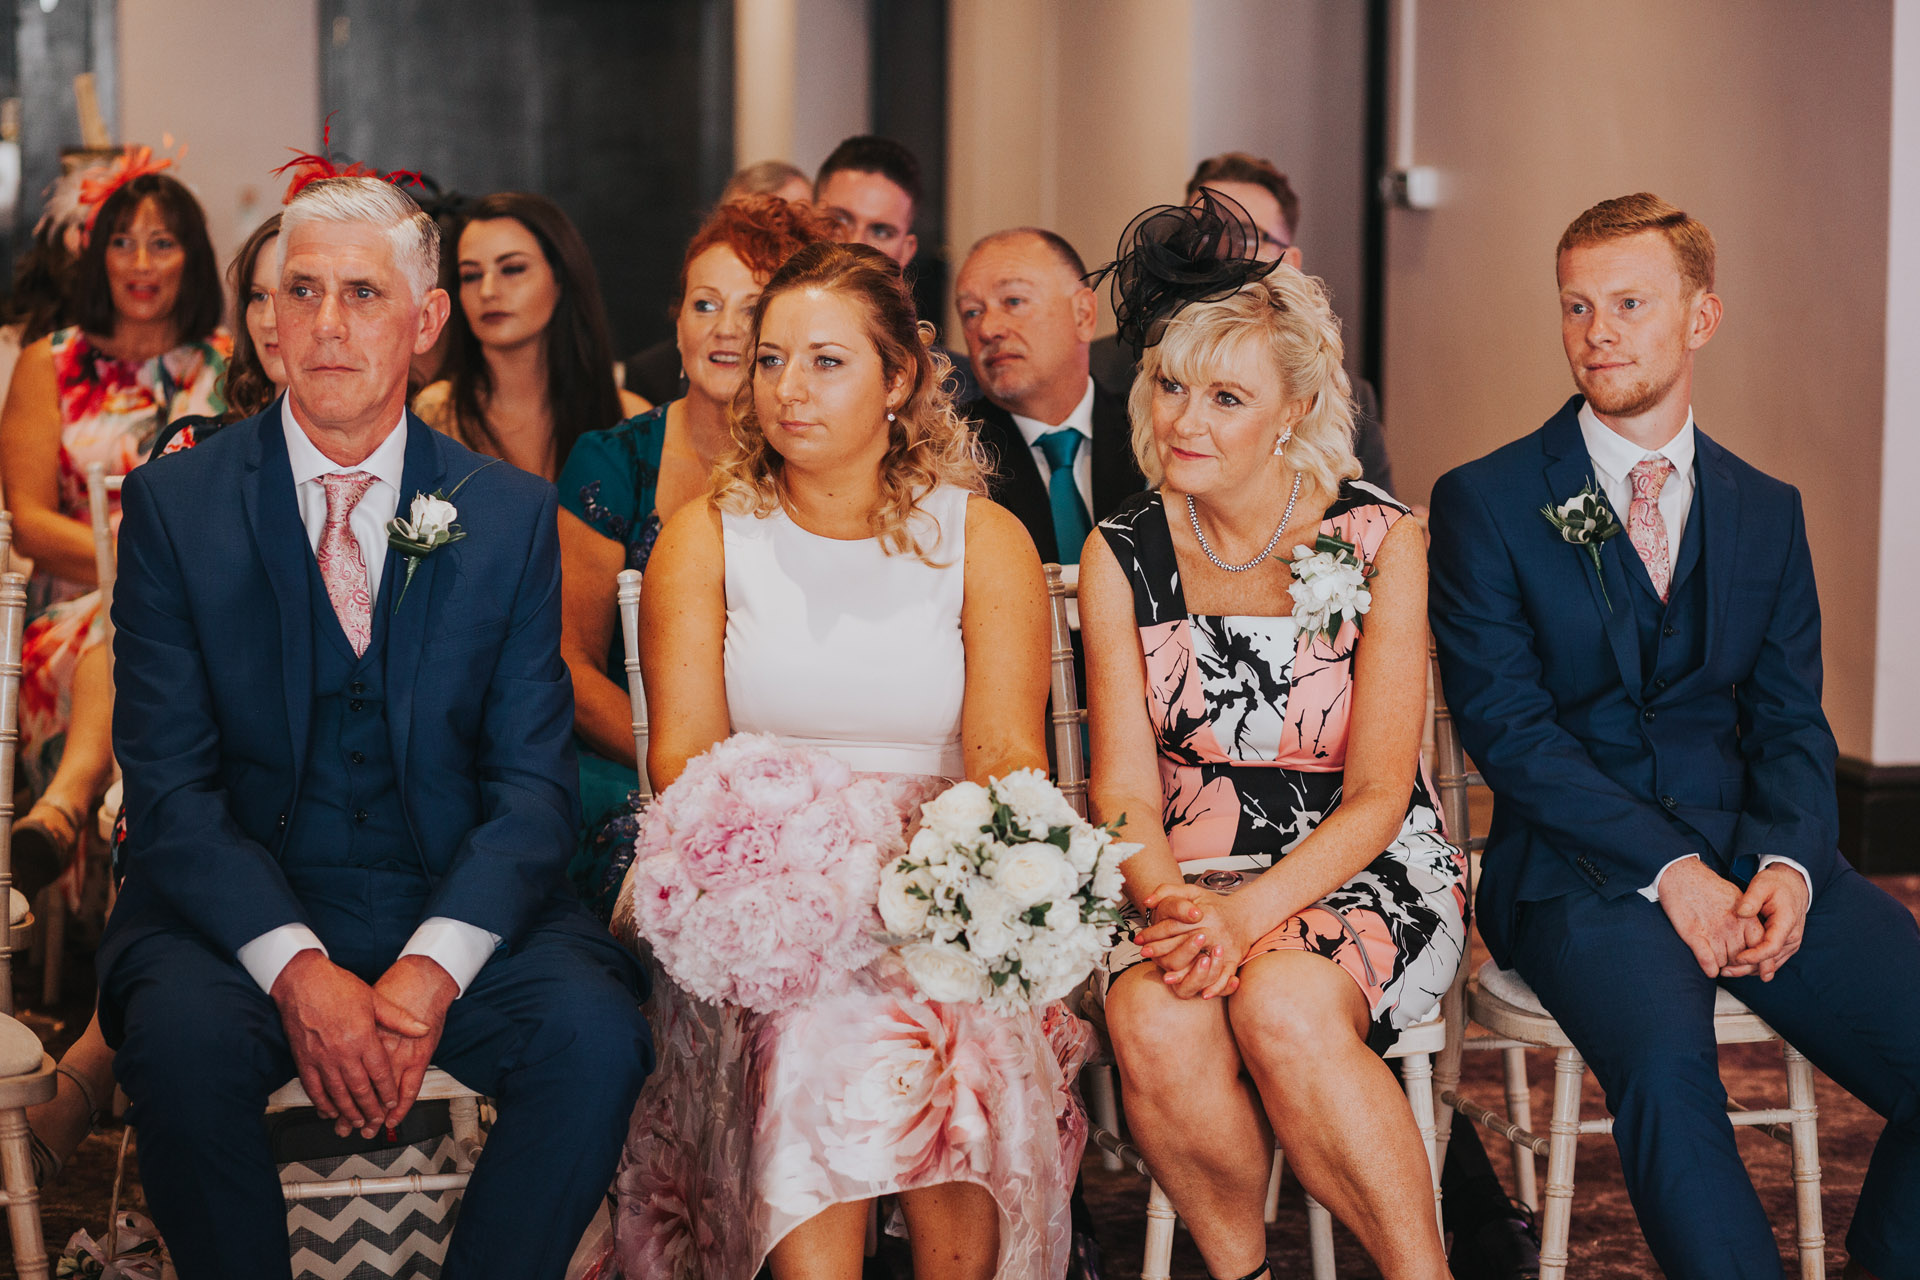 Brides family look emotional as they watch ceremony. 